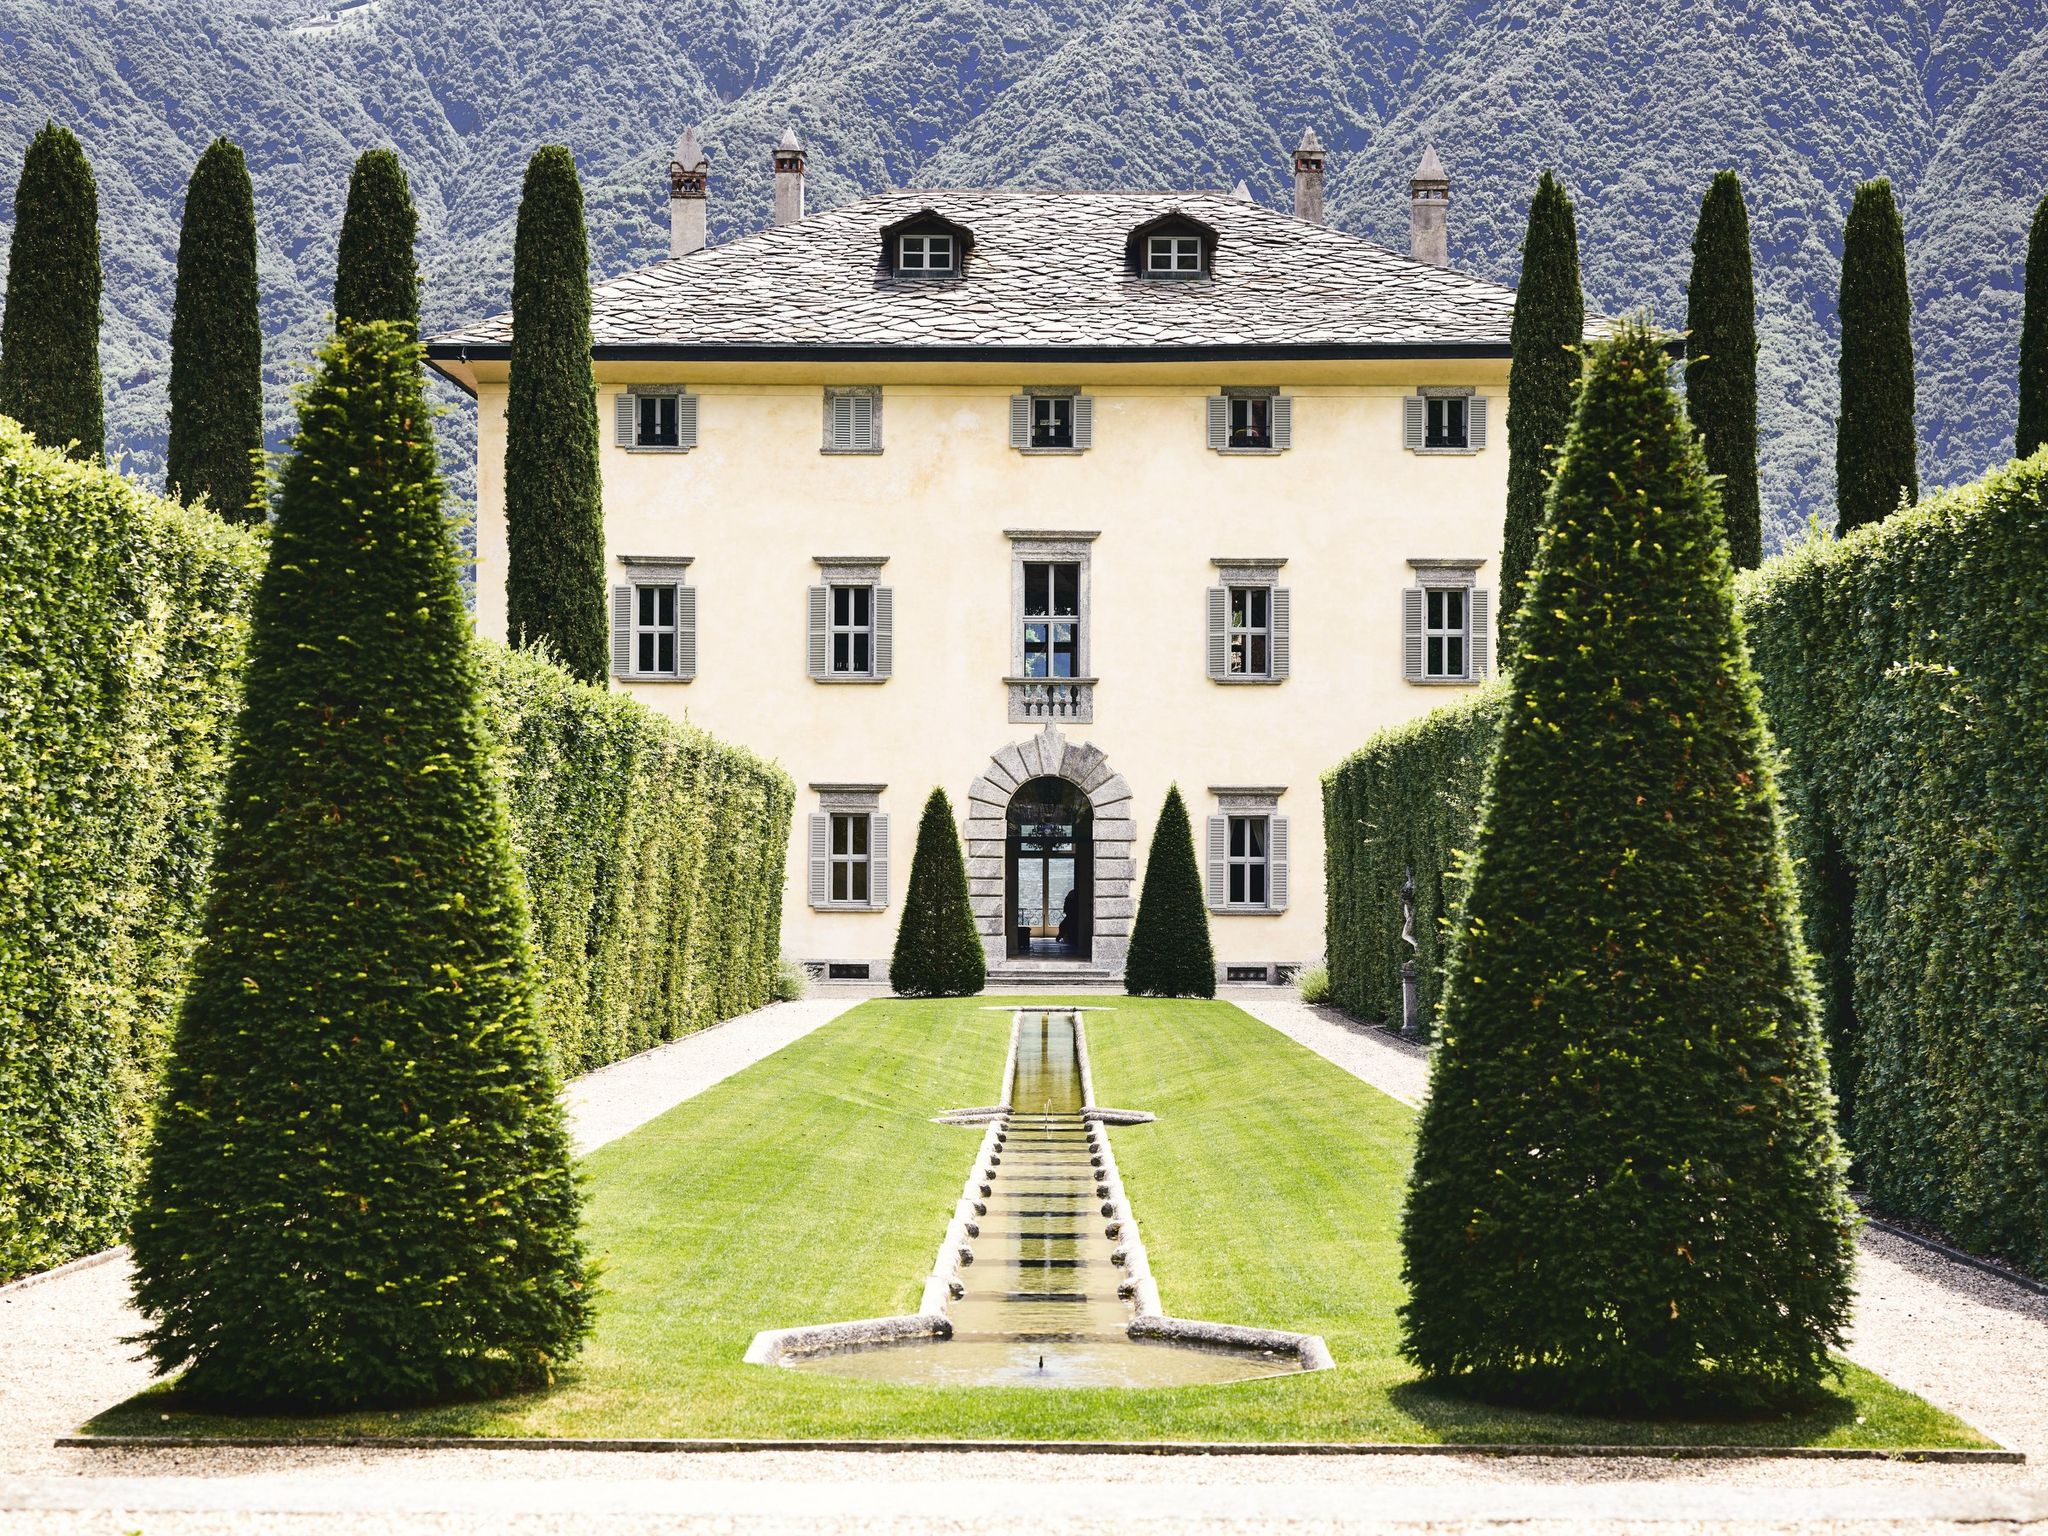 Tree, Green, Property, Château, Courtyard, House, Building, Estate, Palace, Woody plant, 